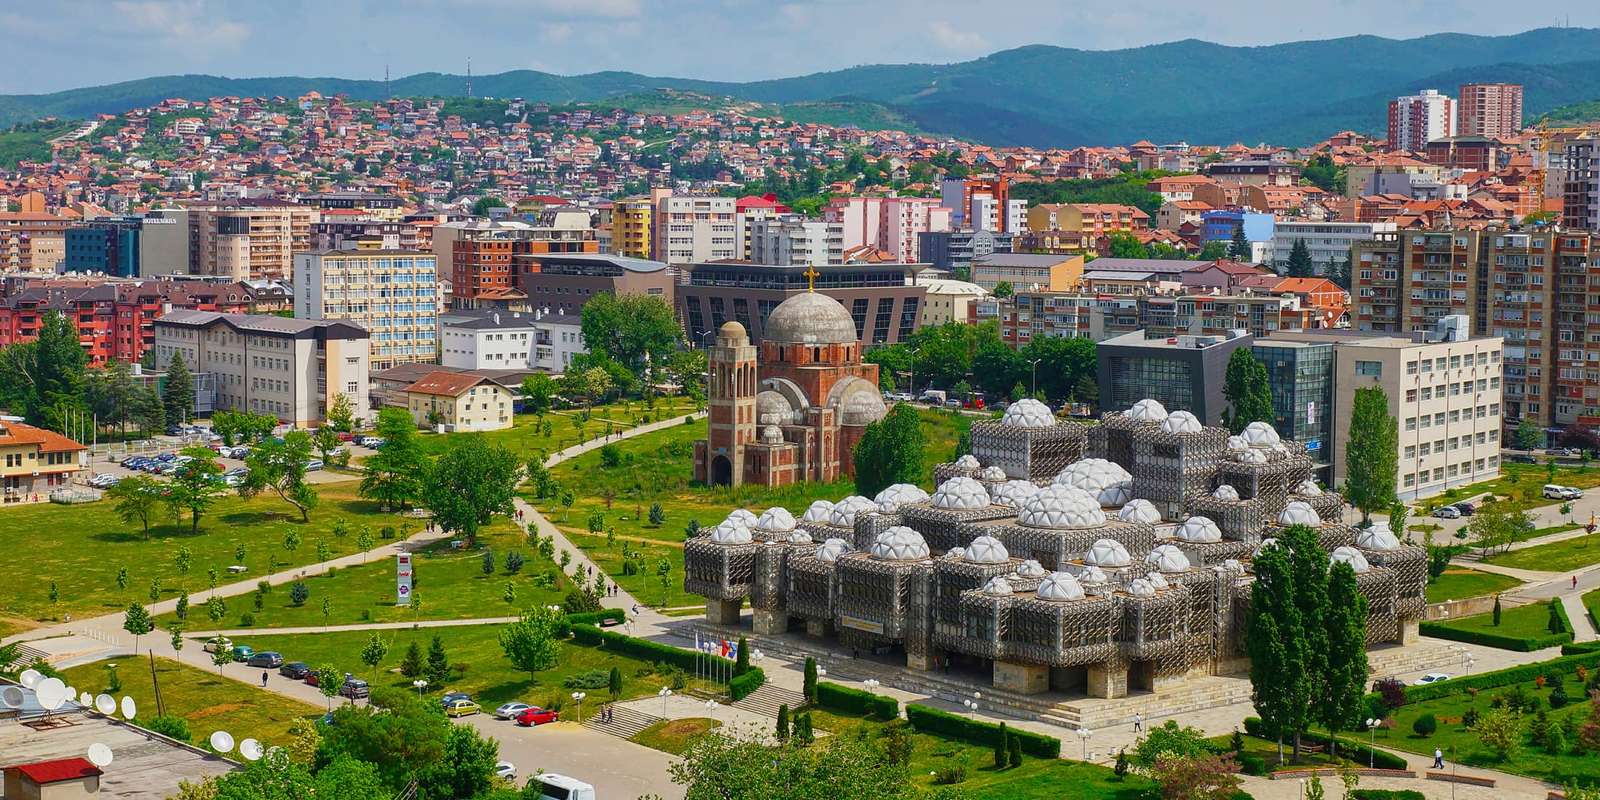 https://dazzlingdawn.com/wp-content/uploads/2023/08/Kosovo-may-be-the-next-destination-for-Bangladeshis-going-to-Europe-1.jpg